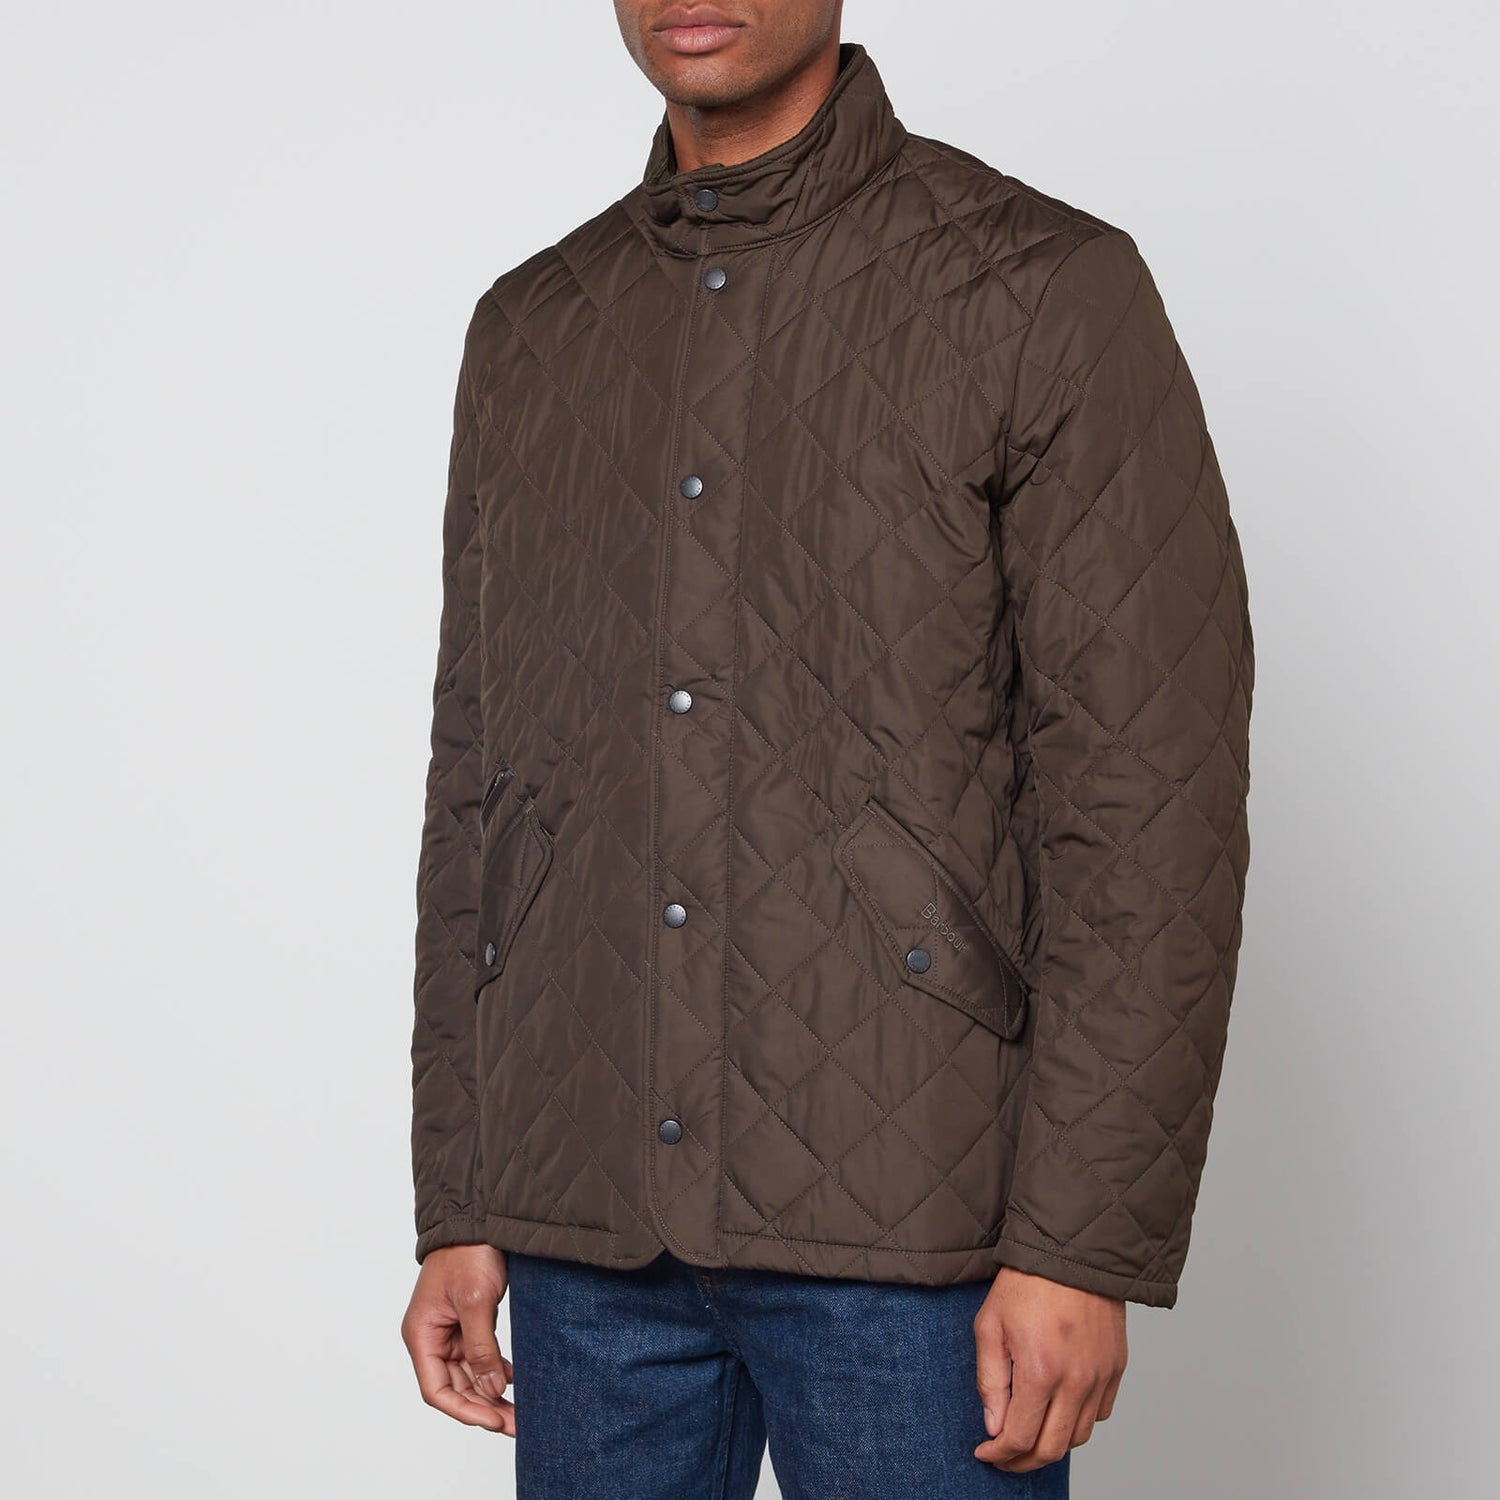 Barbour Heritage Men's Chelsea SportsQuilted - Olive | TheHut.com